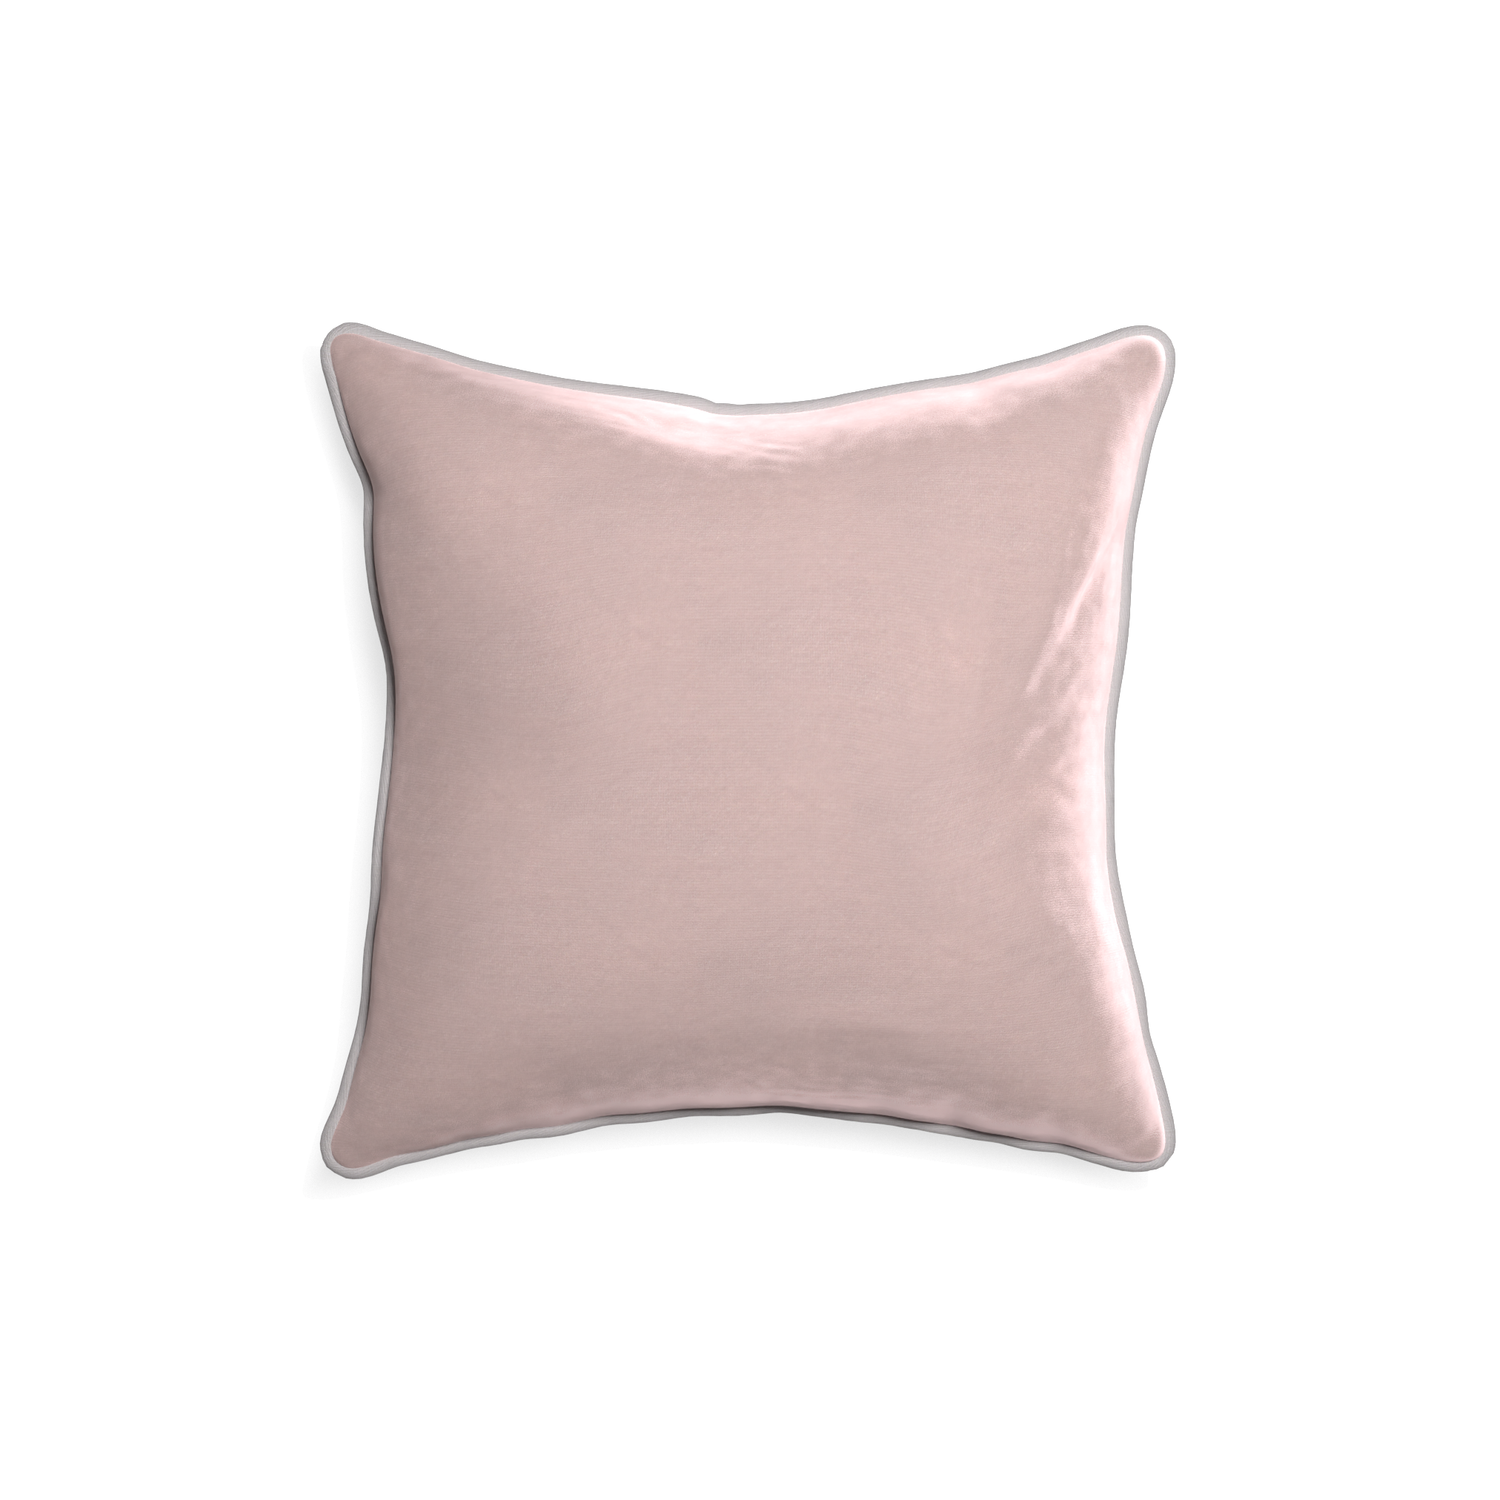 square light pink velvet pillow with light grey piping 